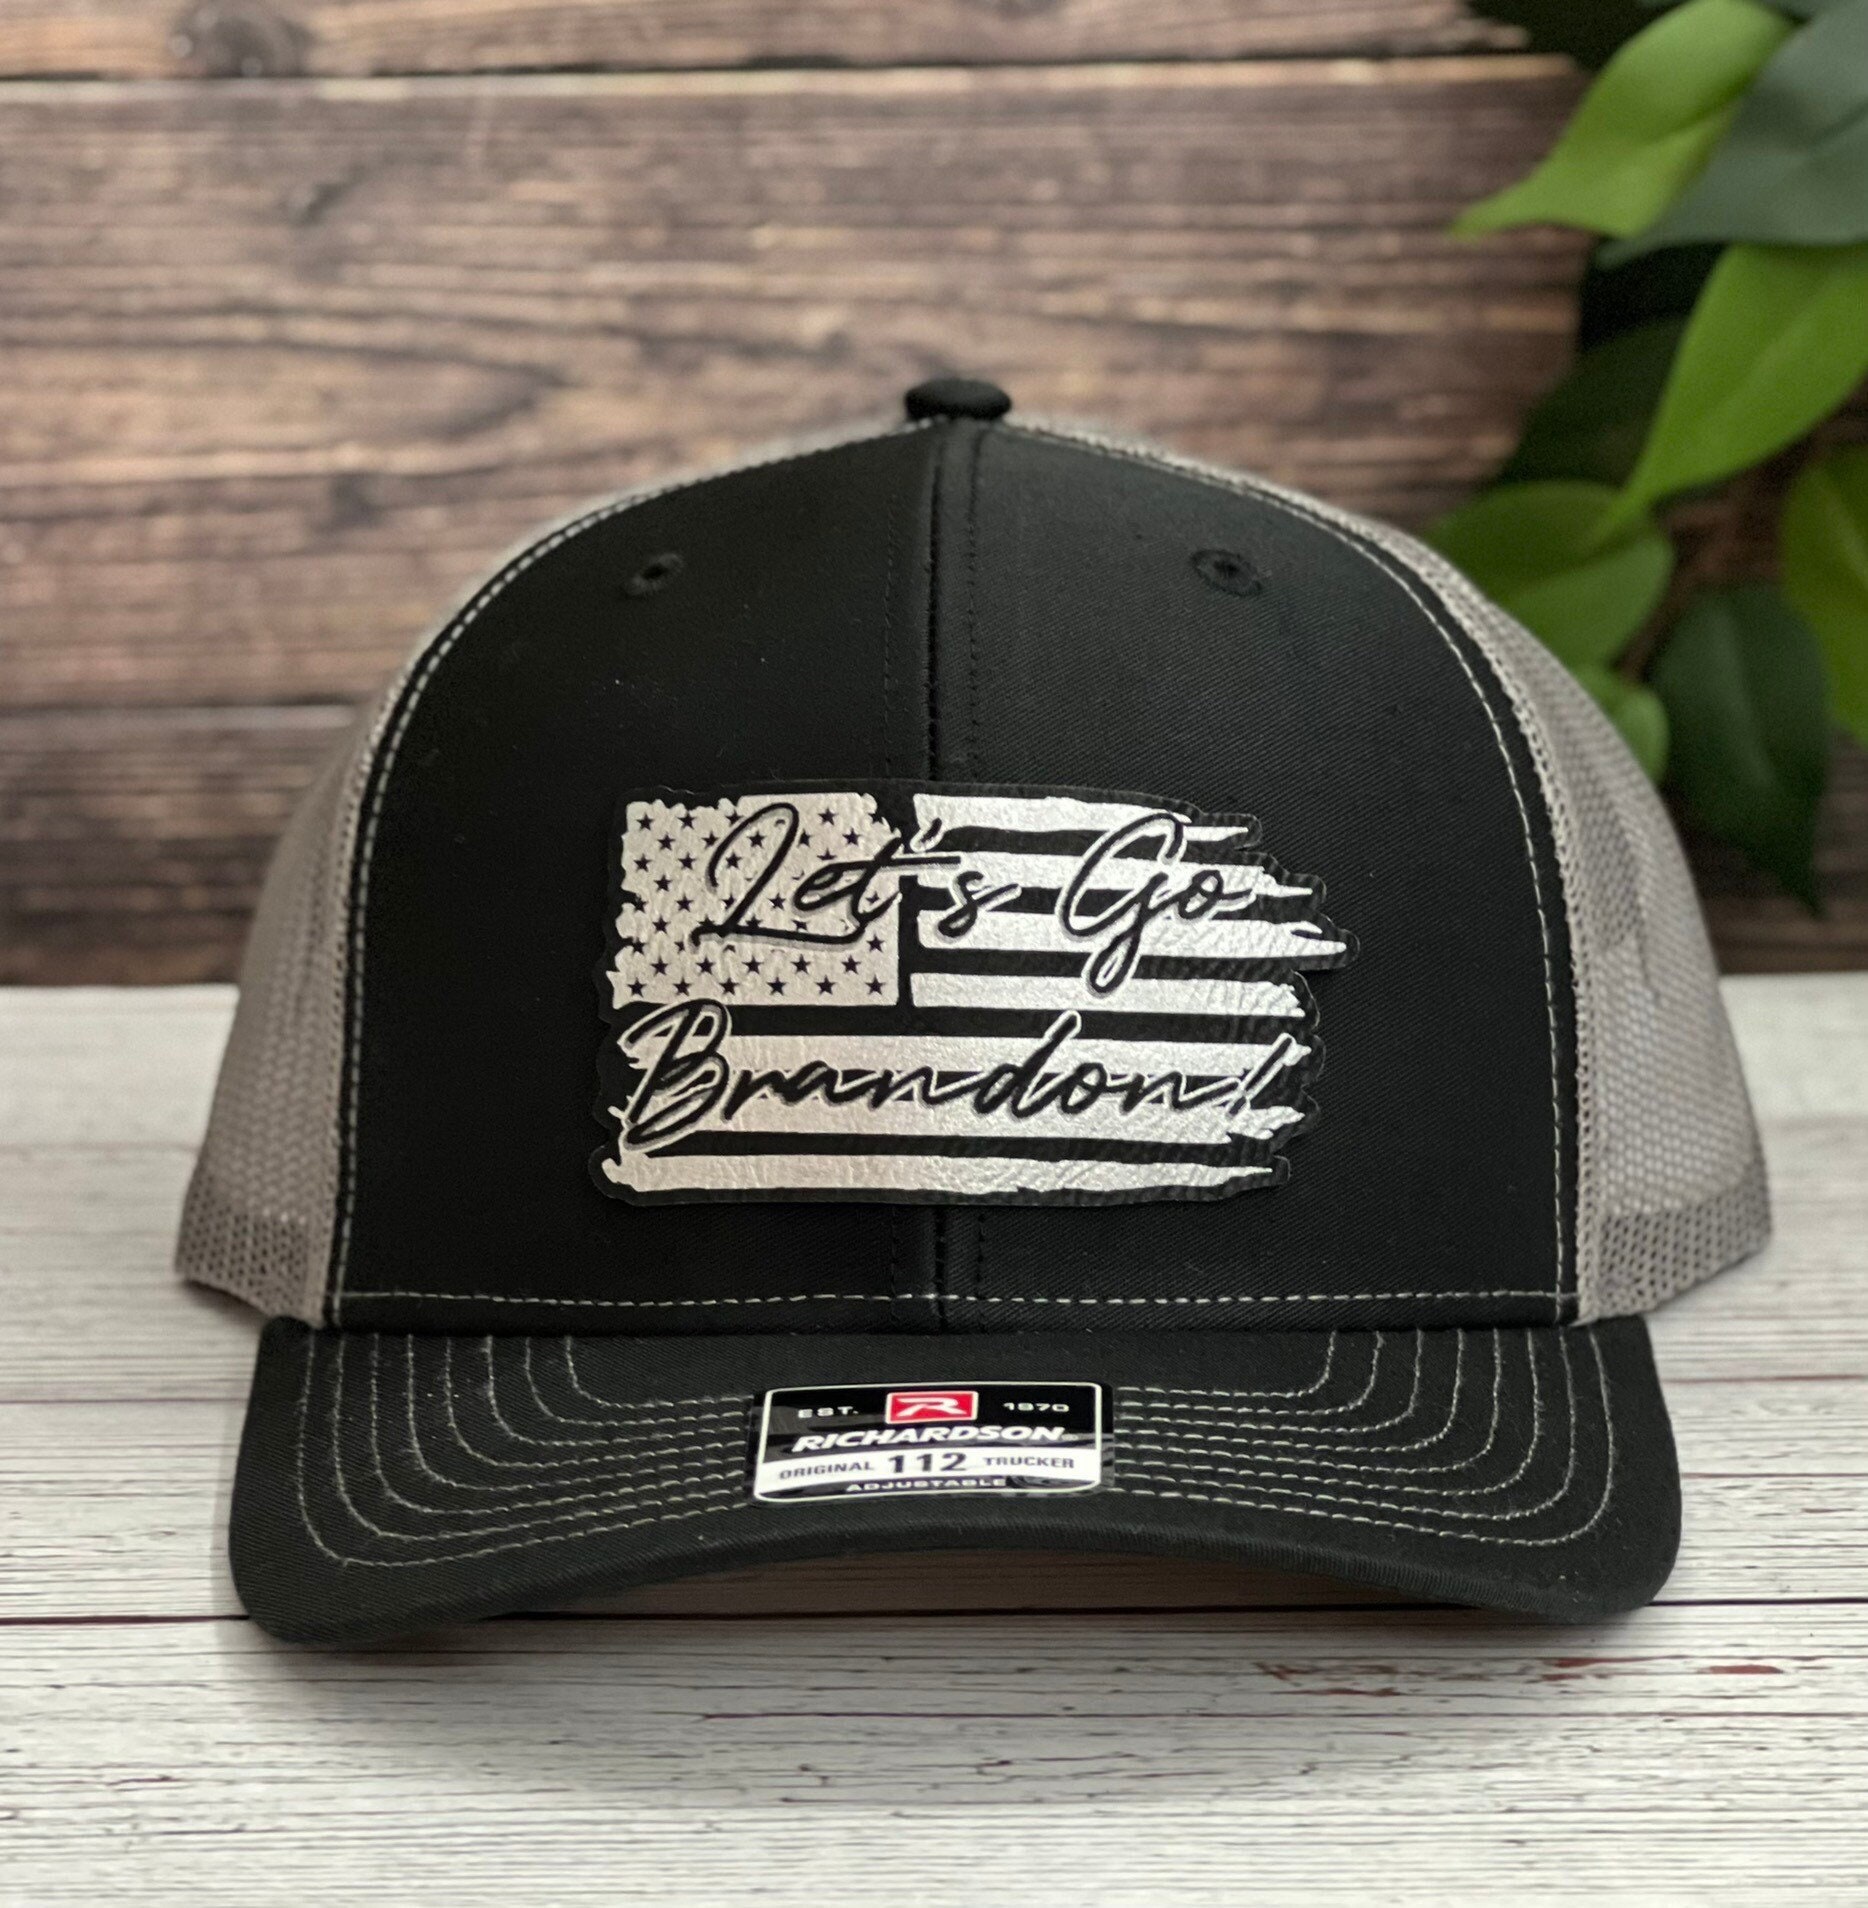 Let's Go Brandon All Black American Flag Patch Sewn on Classic Trucker